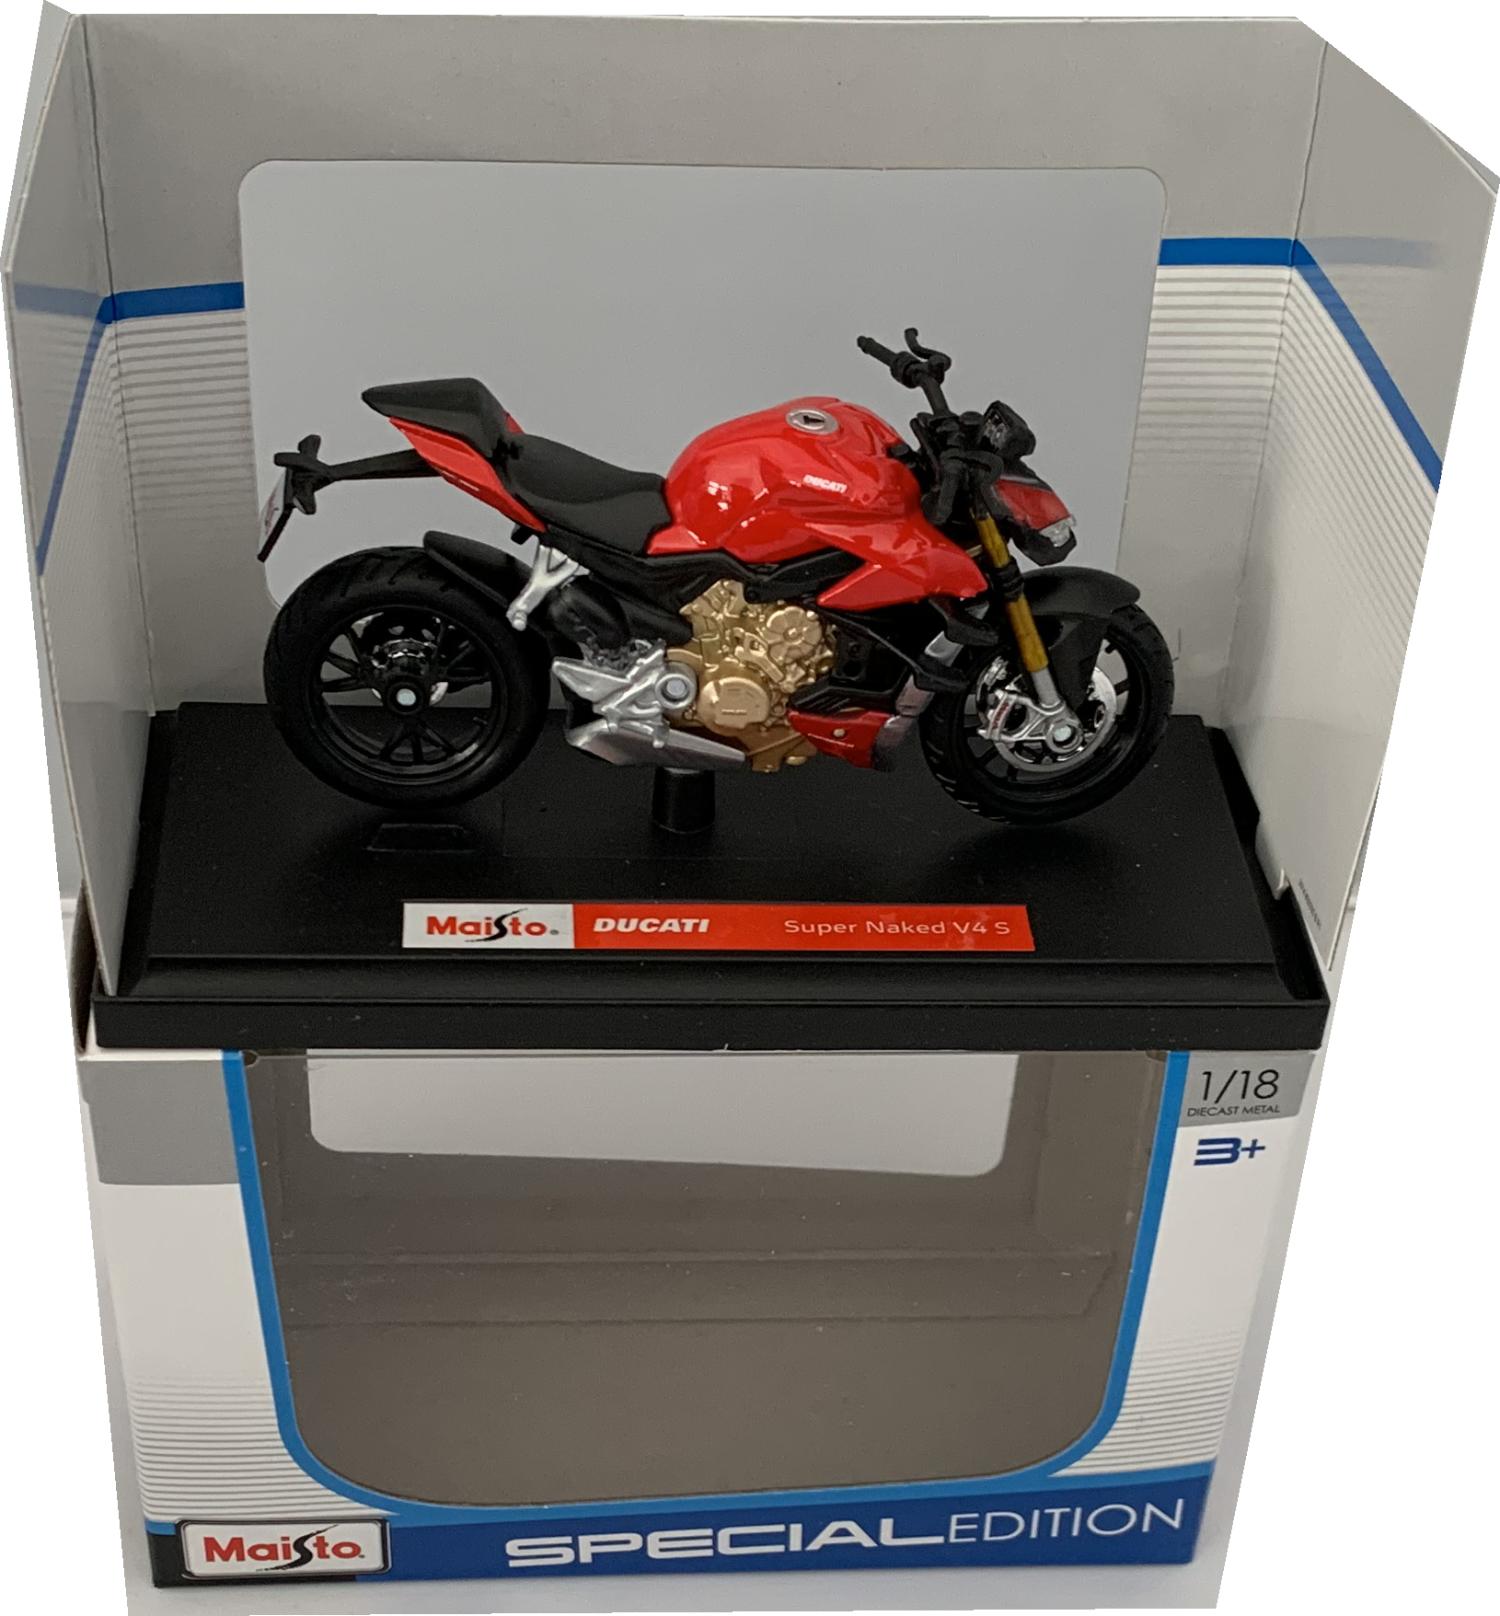 Ducati Super Naked V4 S 2020 in red 1:18 scale model from Maisto, Model is mounted on a removable plinth and presented in a window display box